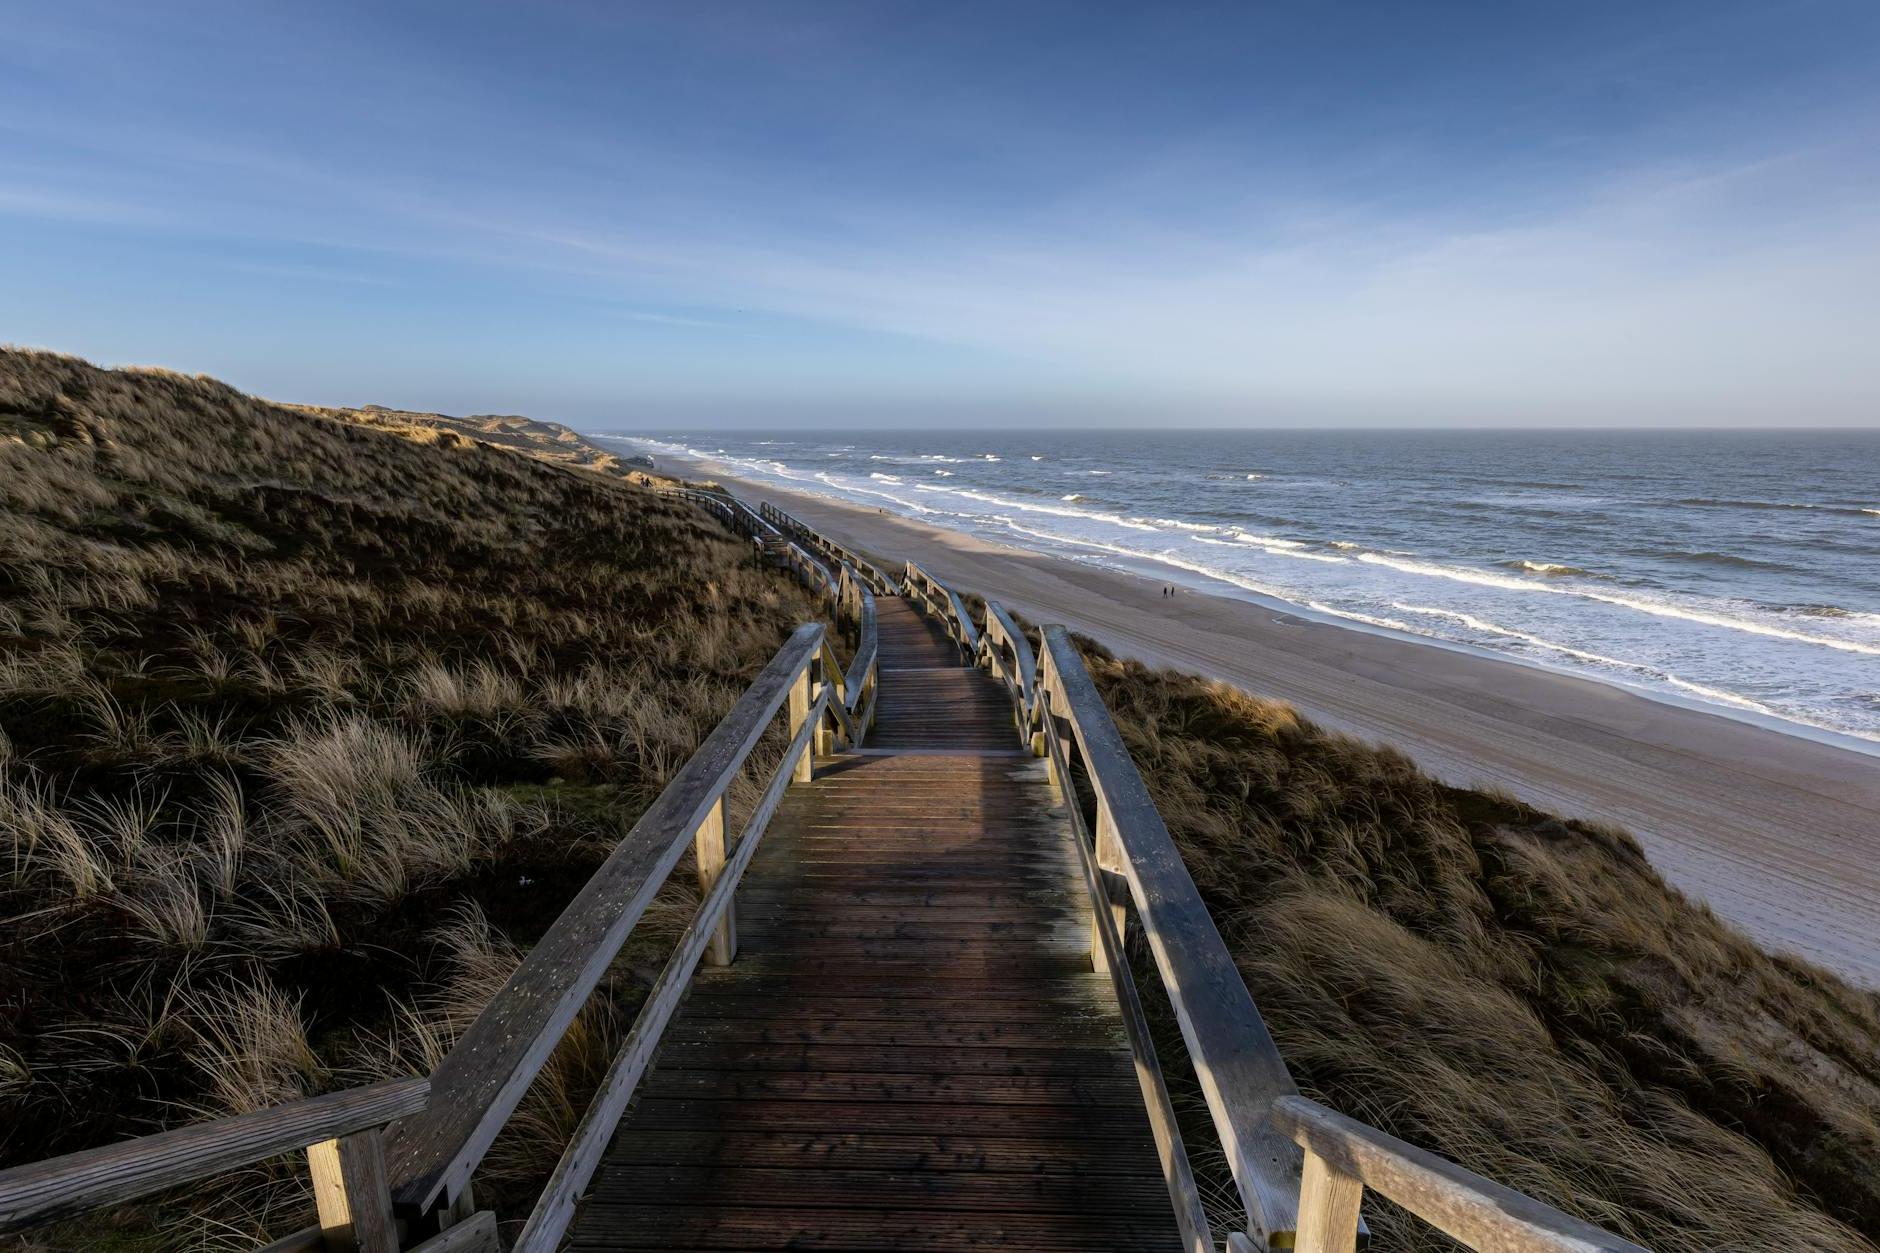 A wooden walkway leading to the beach and ocean